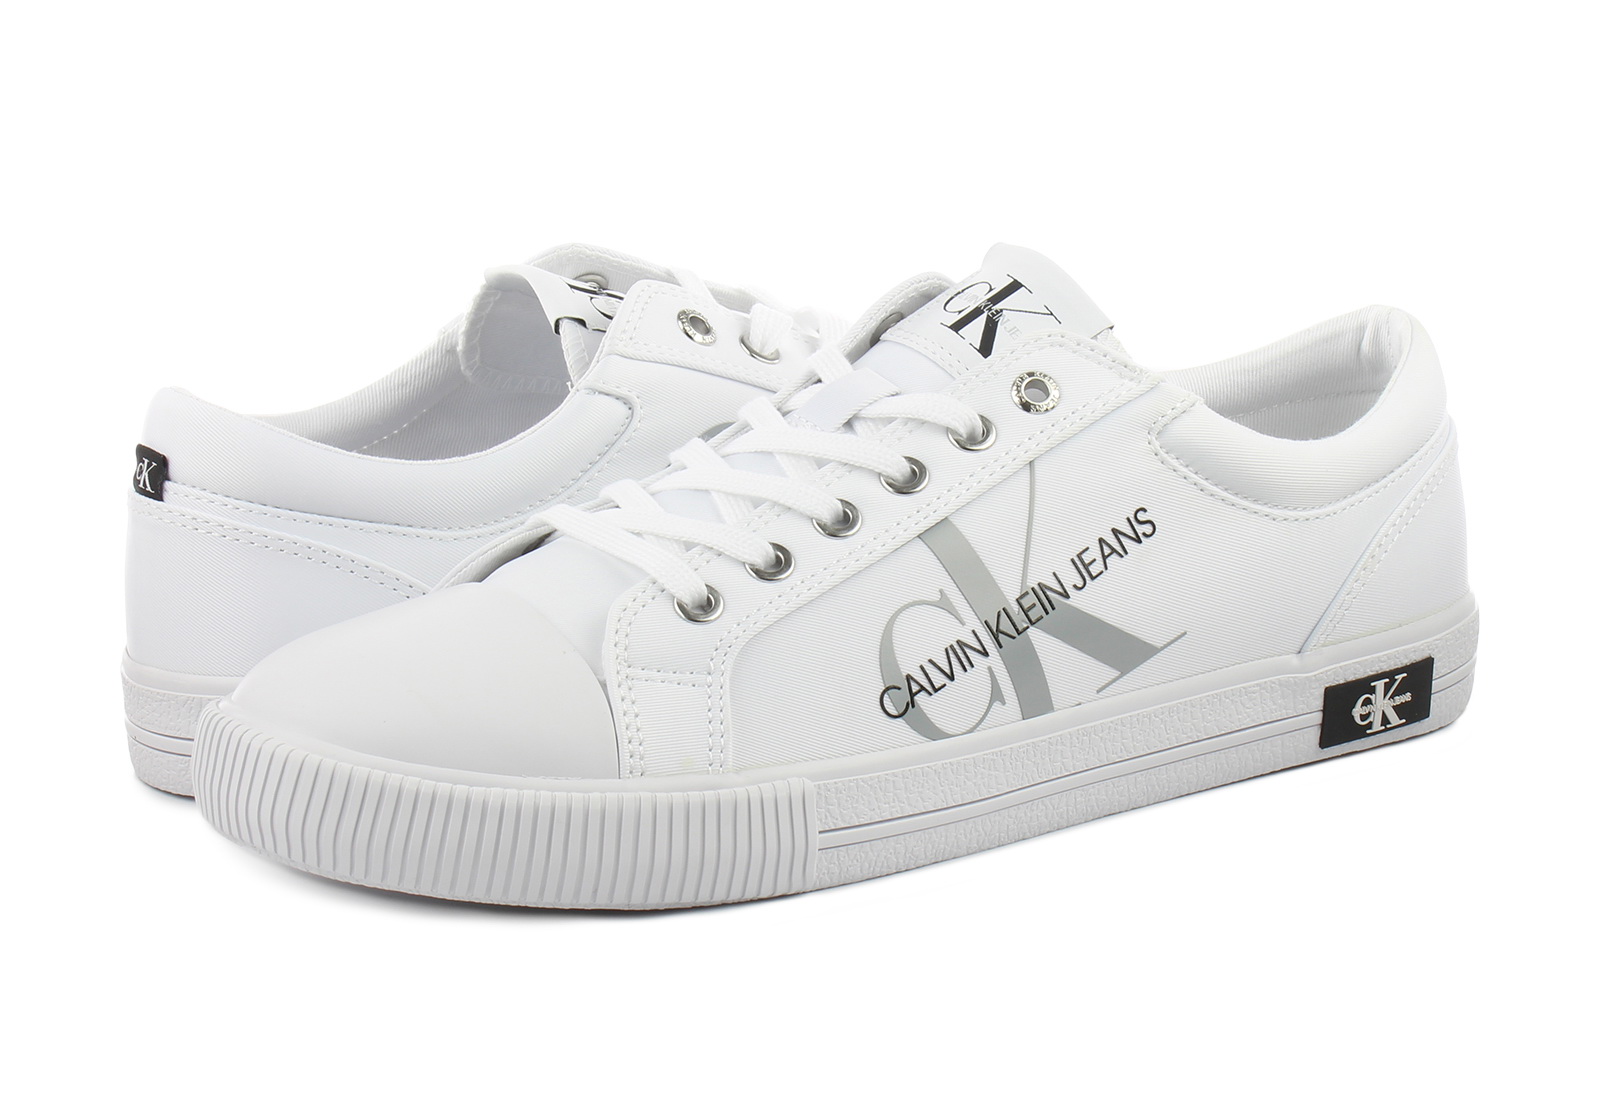 Calvin Klein Trainers - Stannis - YM00015-YAF - Online shop for sneakers,  shoes and boots